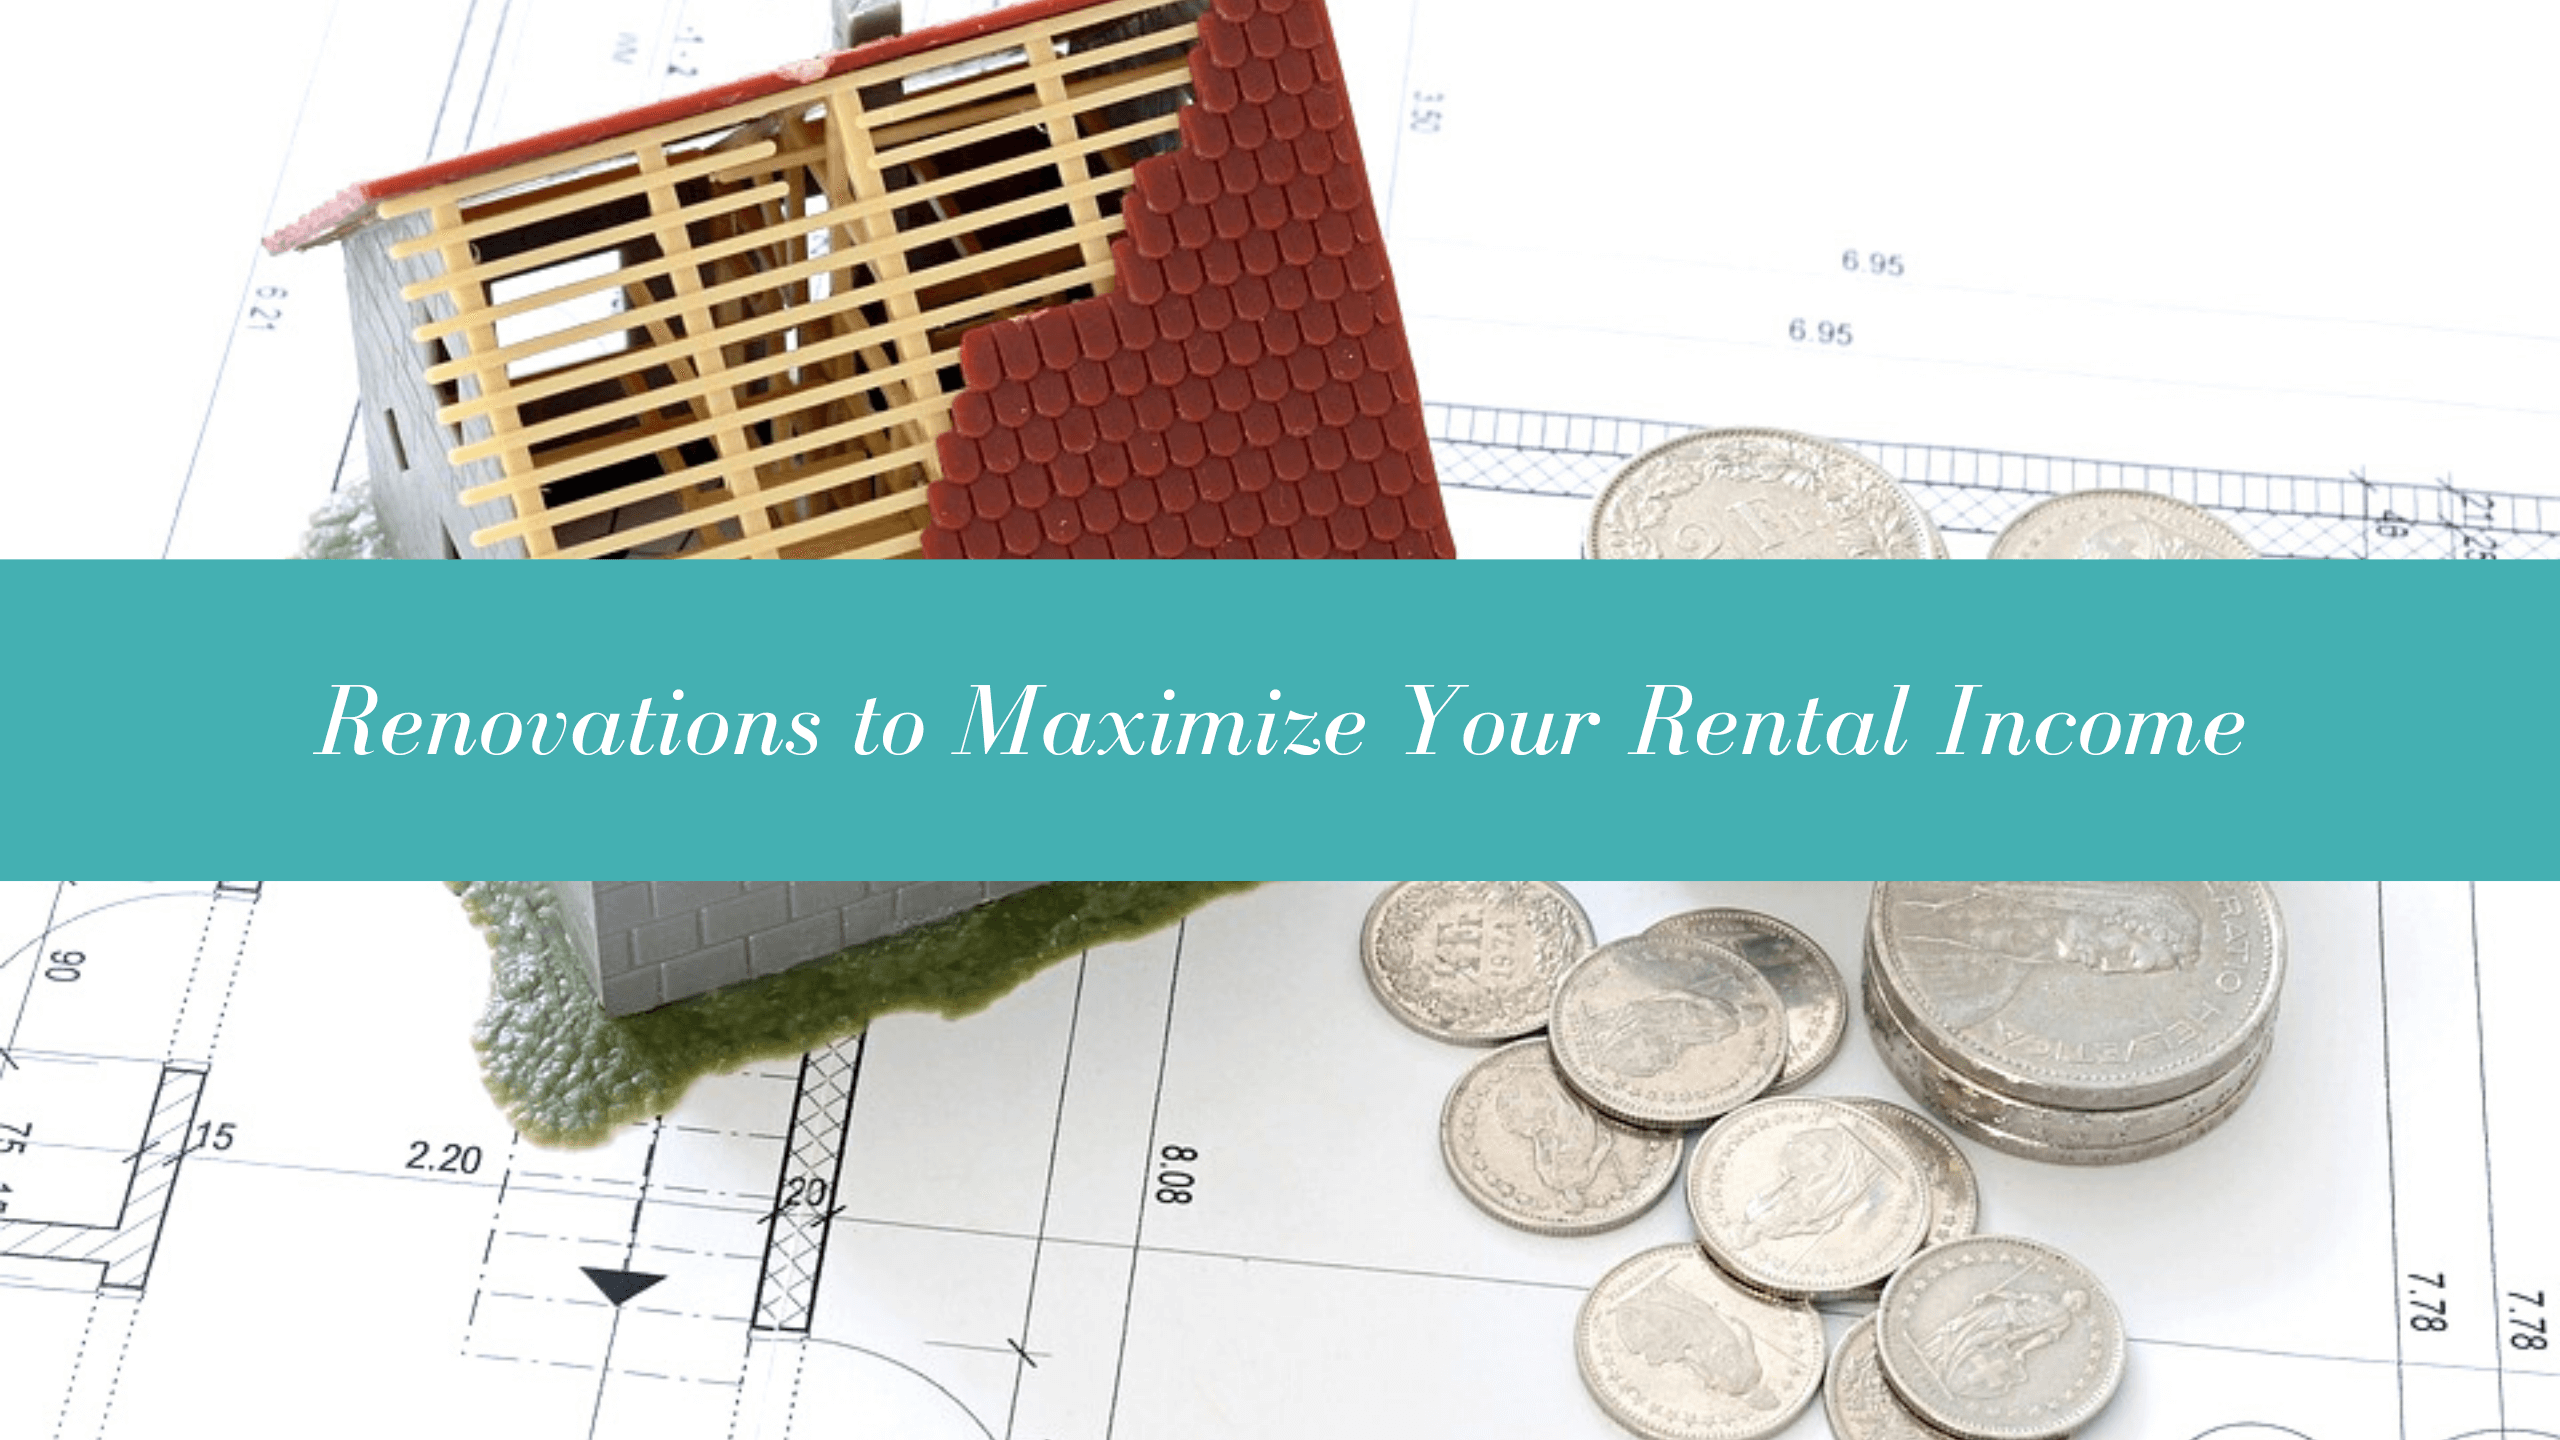 Renovations to Maximize Your Rental Income in Bradenton